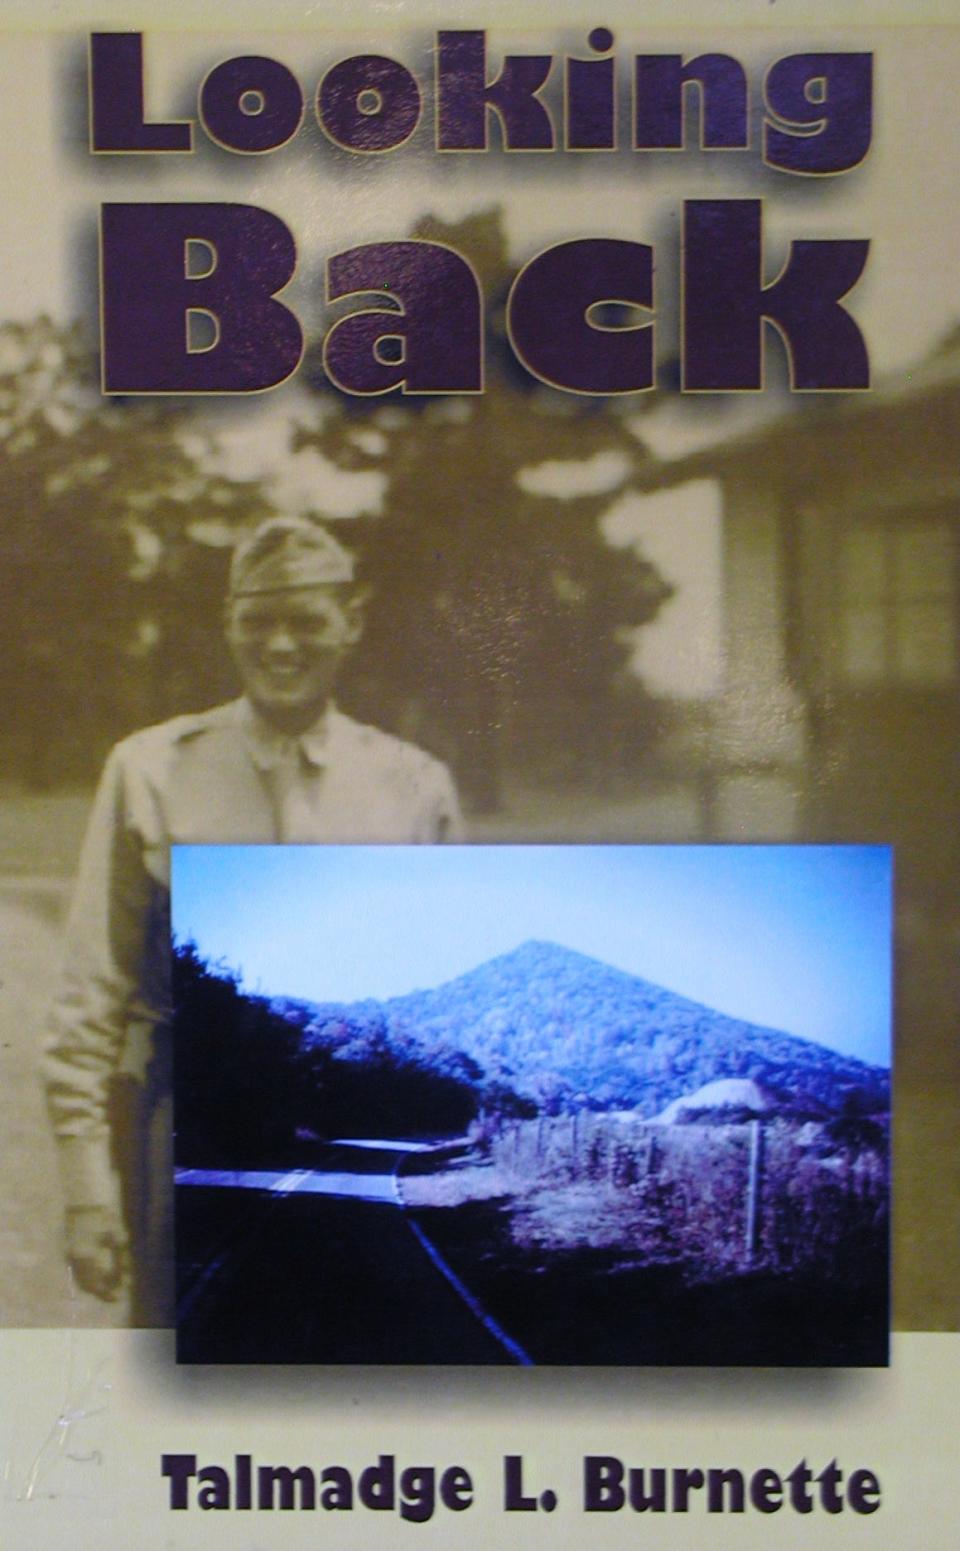 Talmadge L. Burnette's history, "Looking Back," traces the roots of the Burnette family.